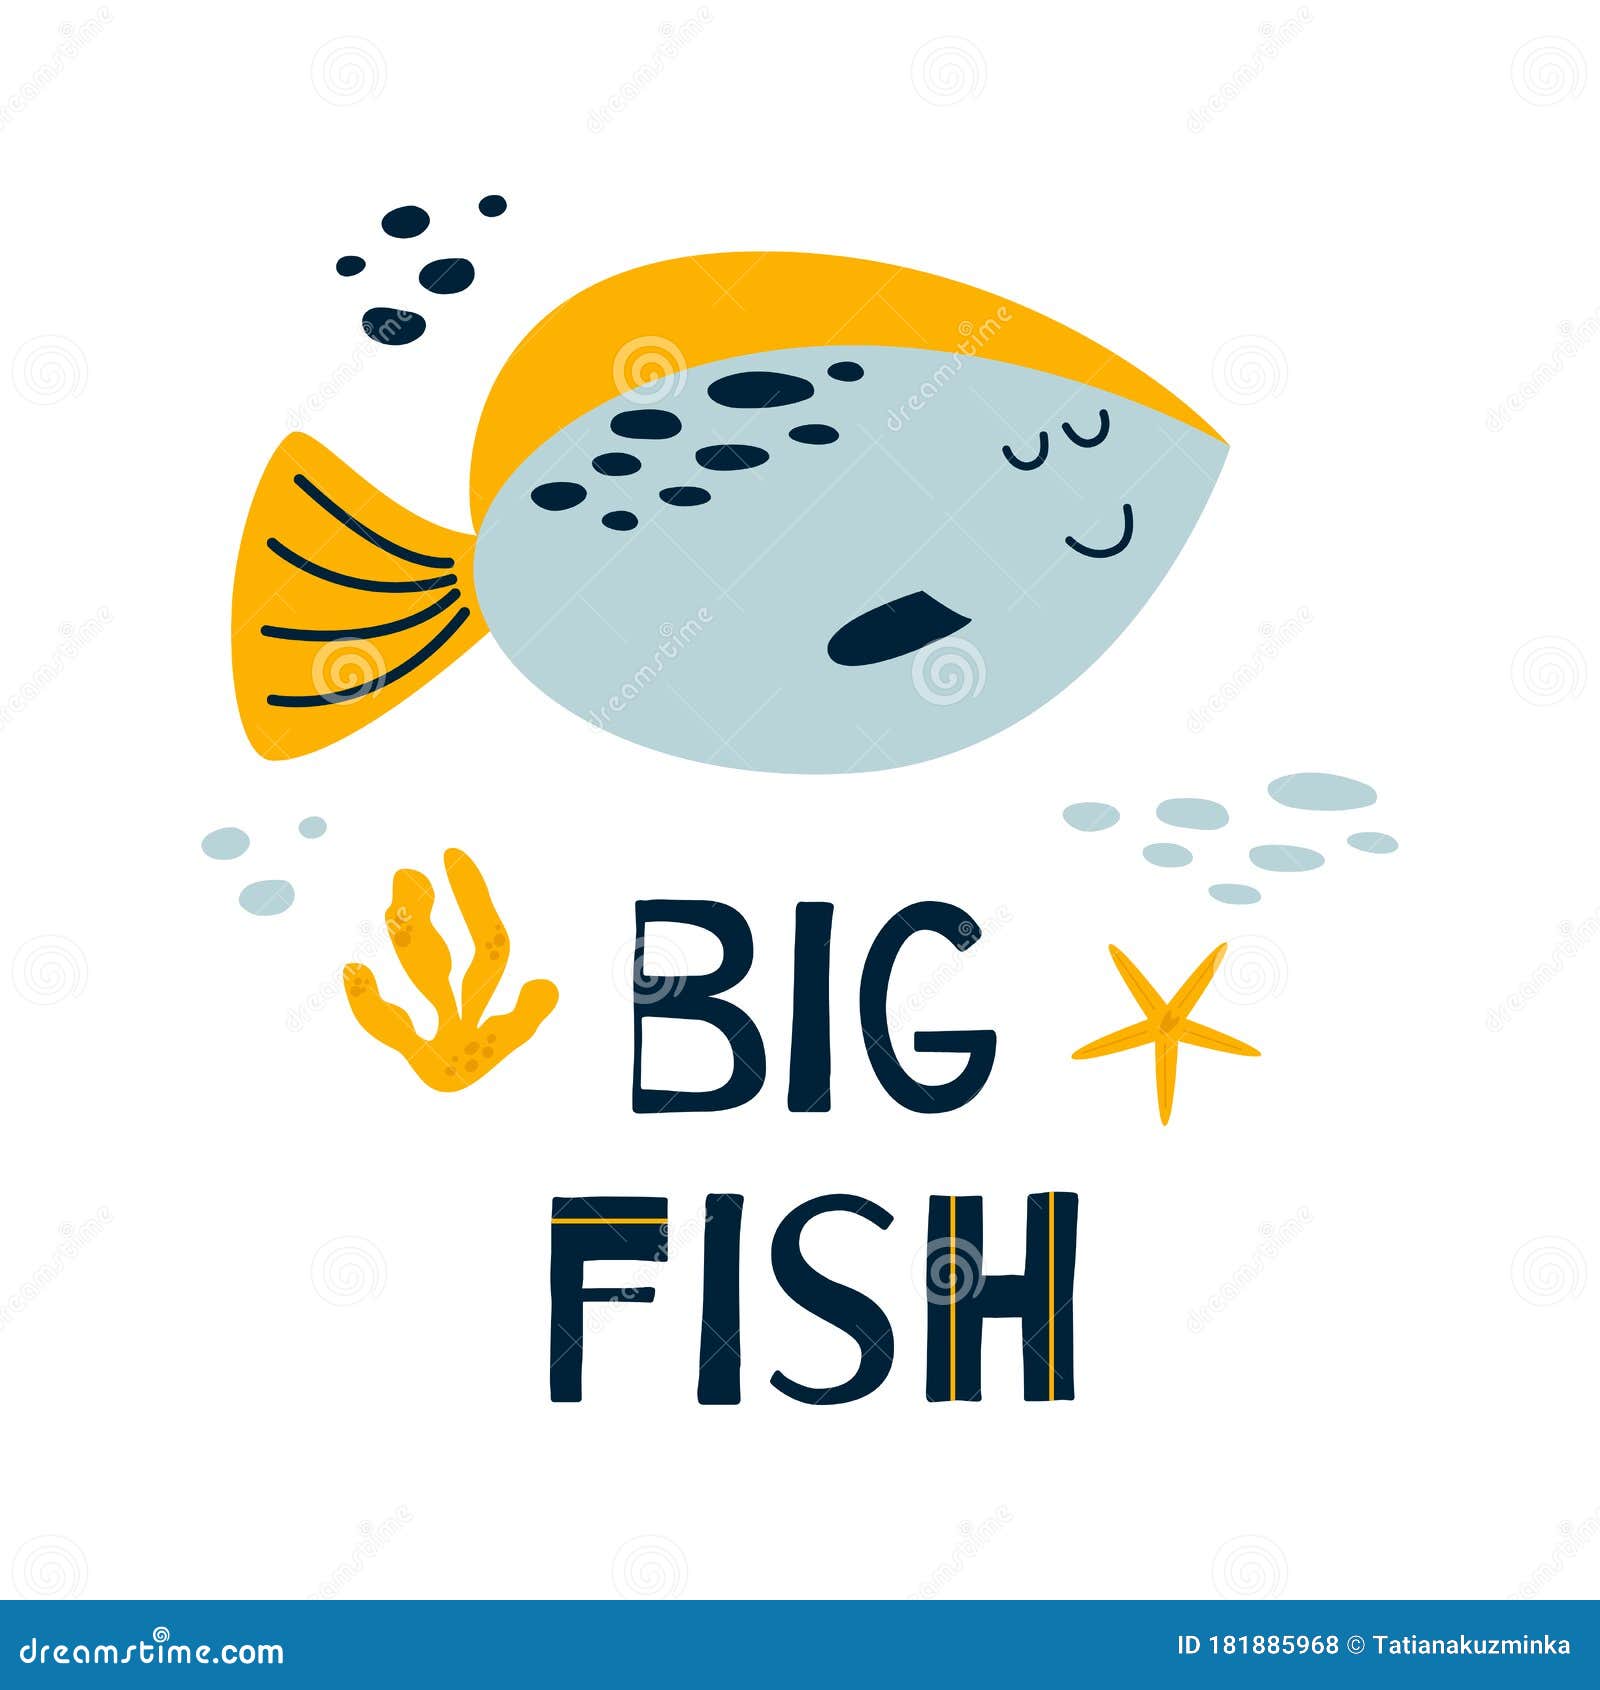 Baby Room Wall Art Cute Poster Children Room with Funny Fish, Sea